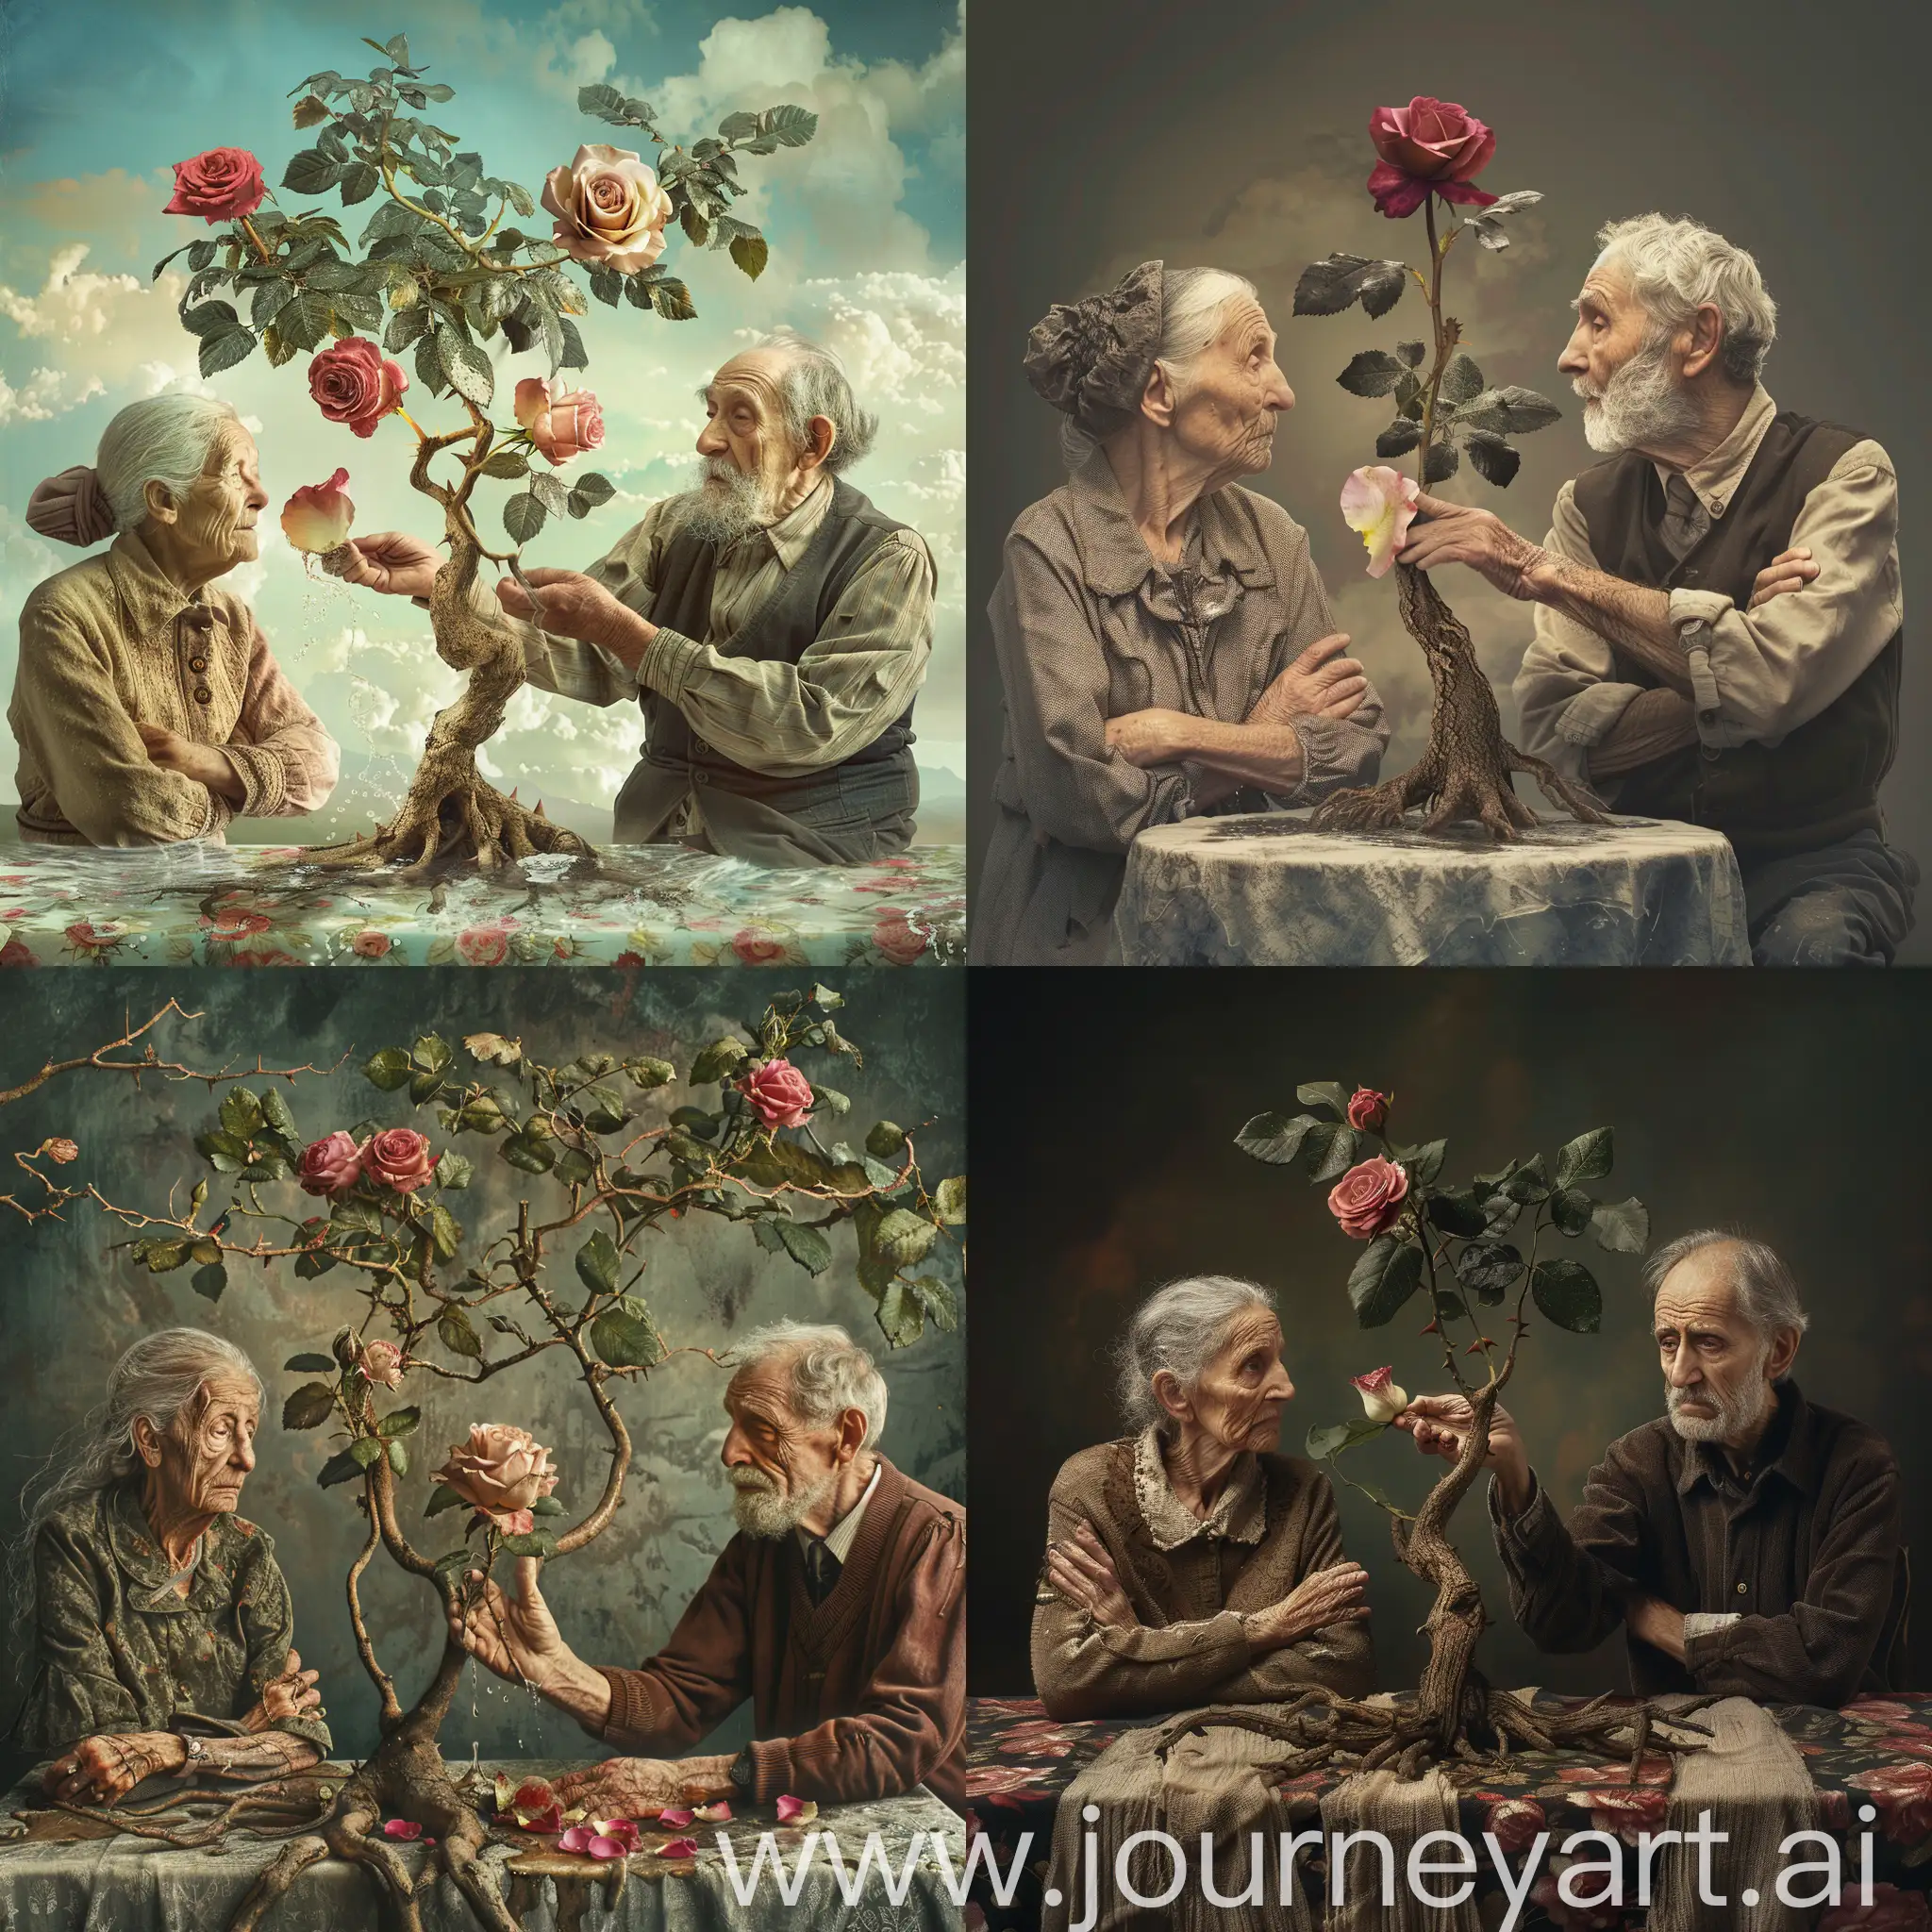 The reason why the picture will be of an old woman and an old man sitting with their arms crossed to examine each other and with a wilted rose in front of the woman. In the middle of the picture will be a man handing a rose to a woman, and the picture may make the woman old. and an old man helping reduce the water on a rose tree